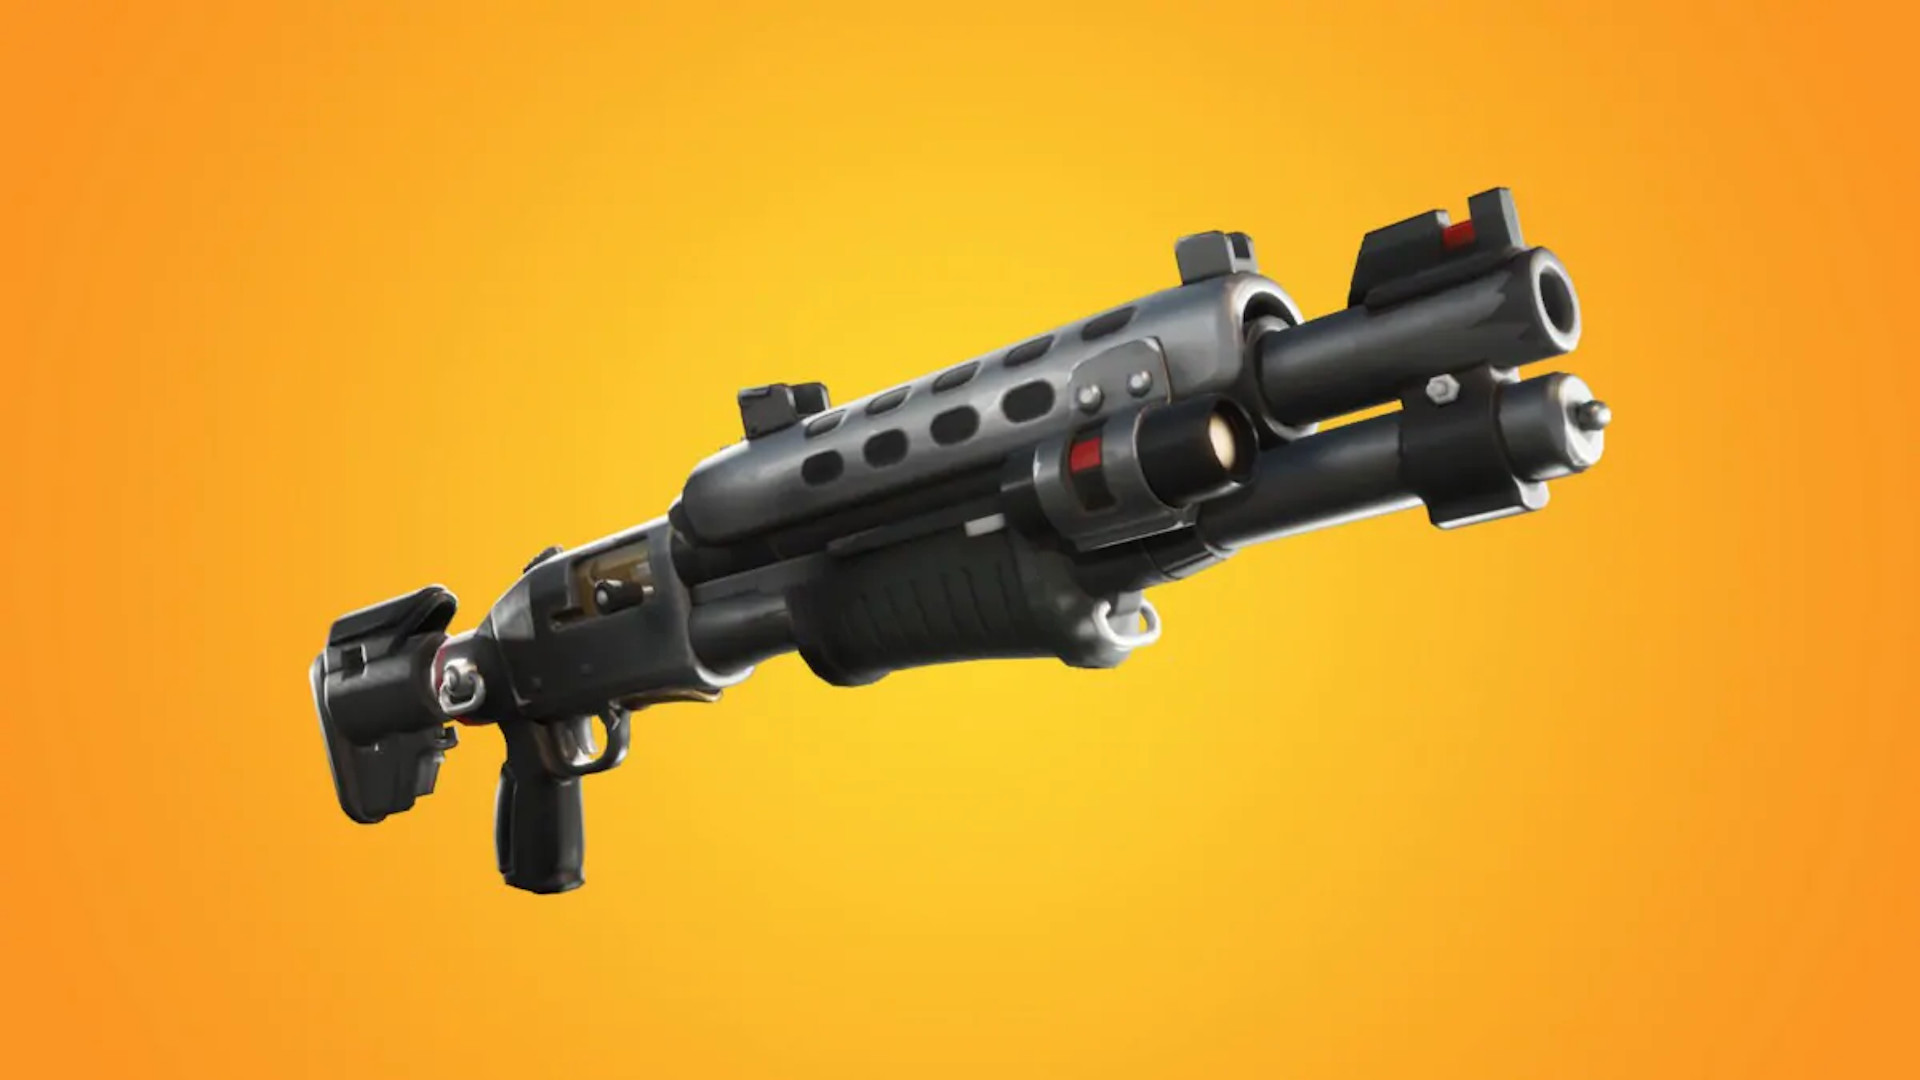 Fortnite Shotguns Are Way Too Powerfull Fortnite Chapter 2 Season 7 Tier List The Best Weapons And How To Craft Them The Loadout